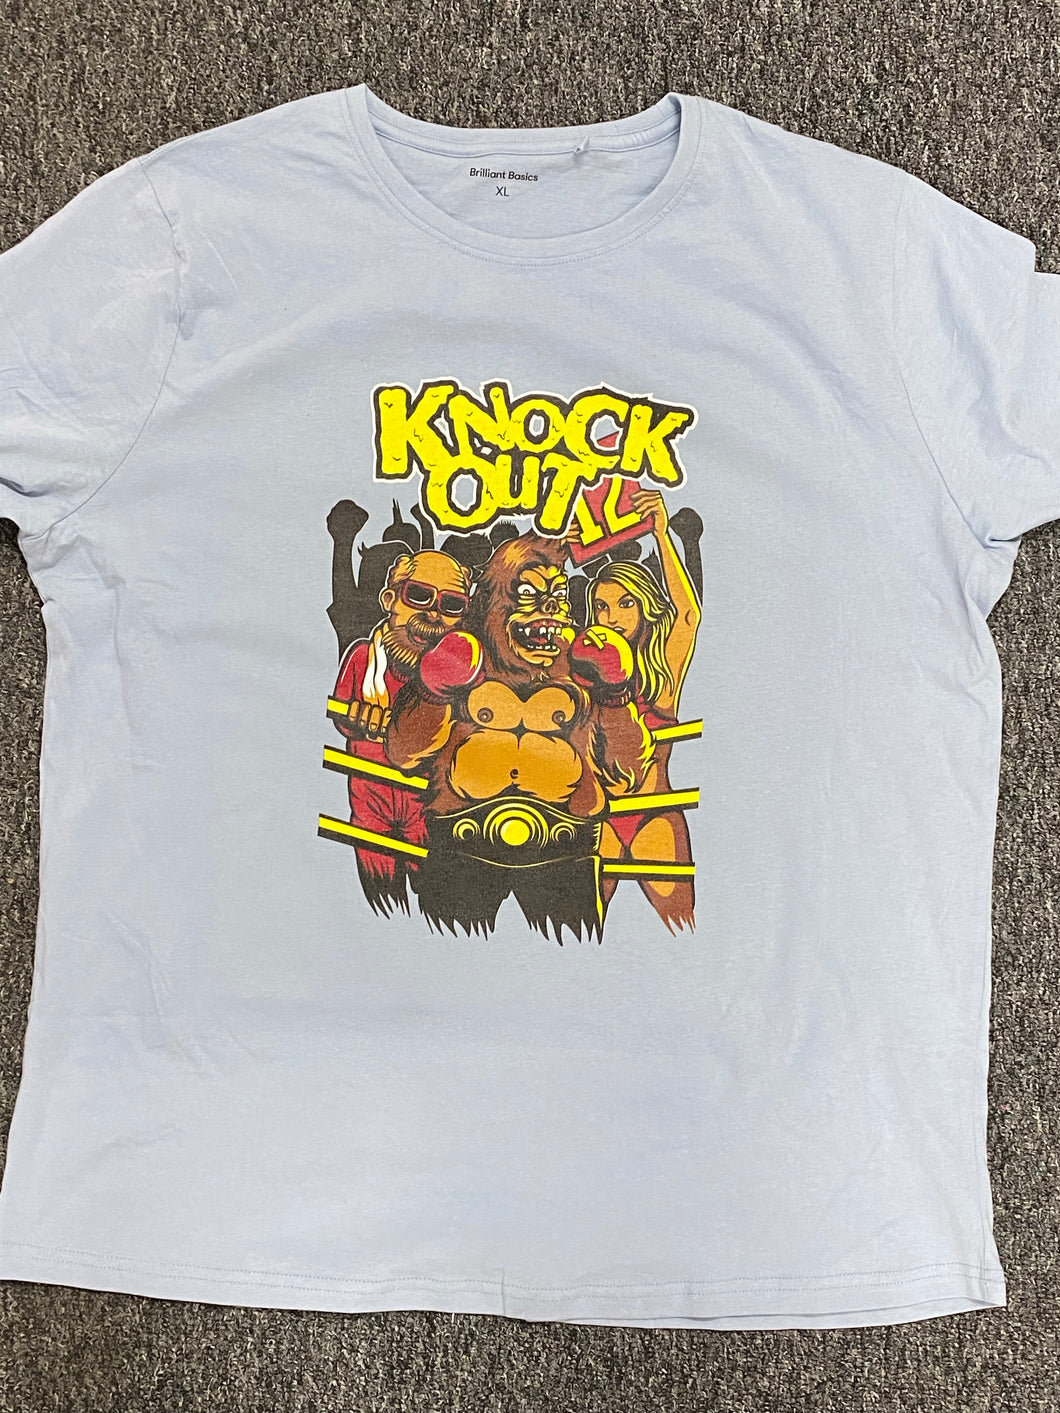 Knock out tshirt